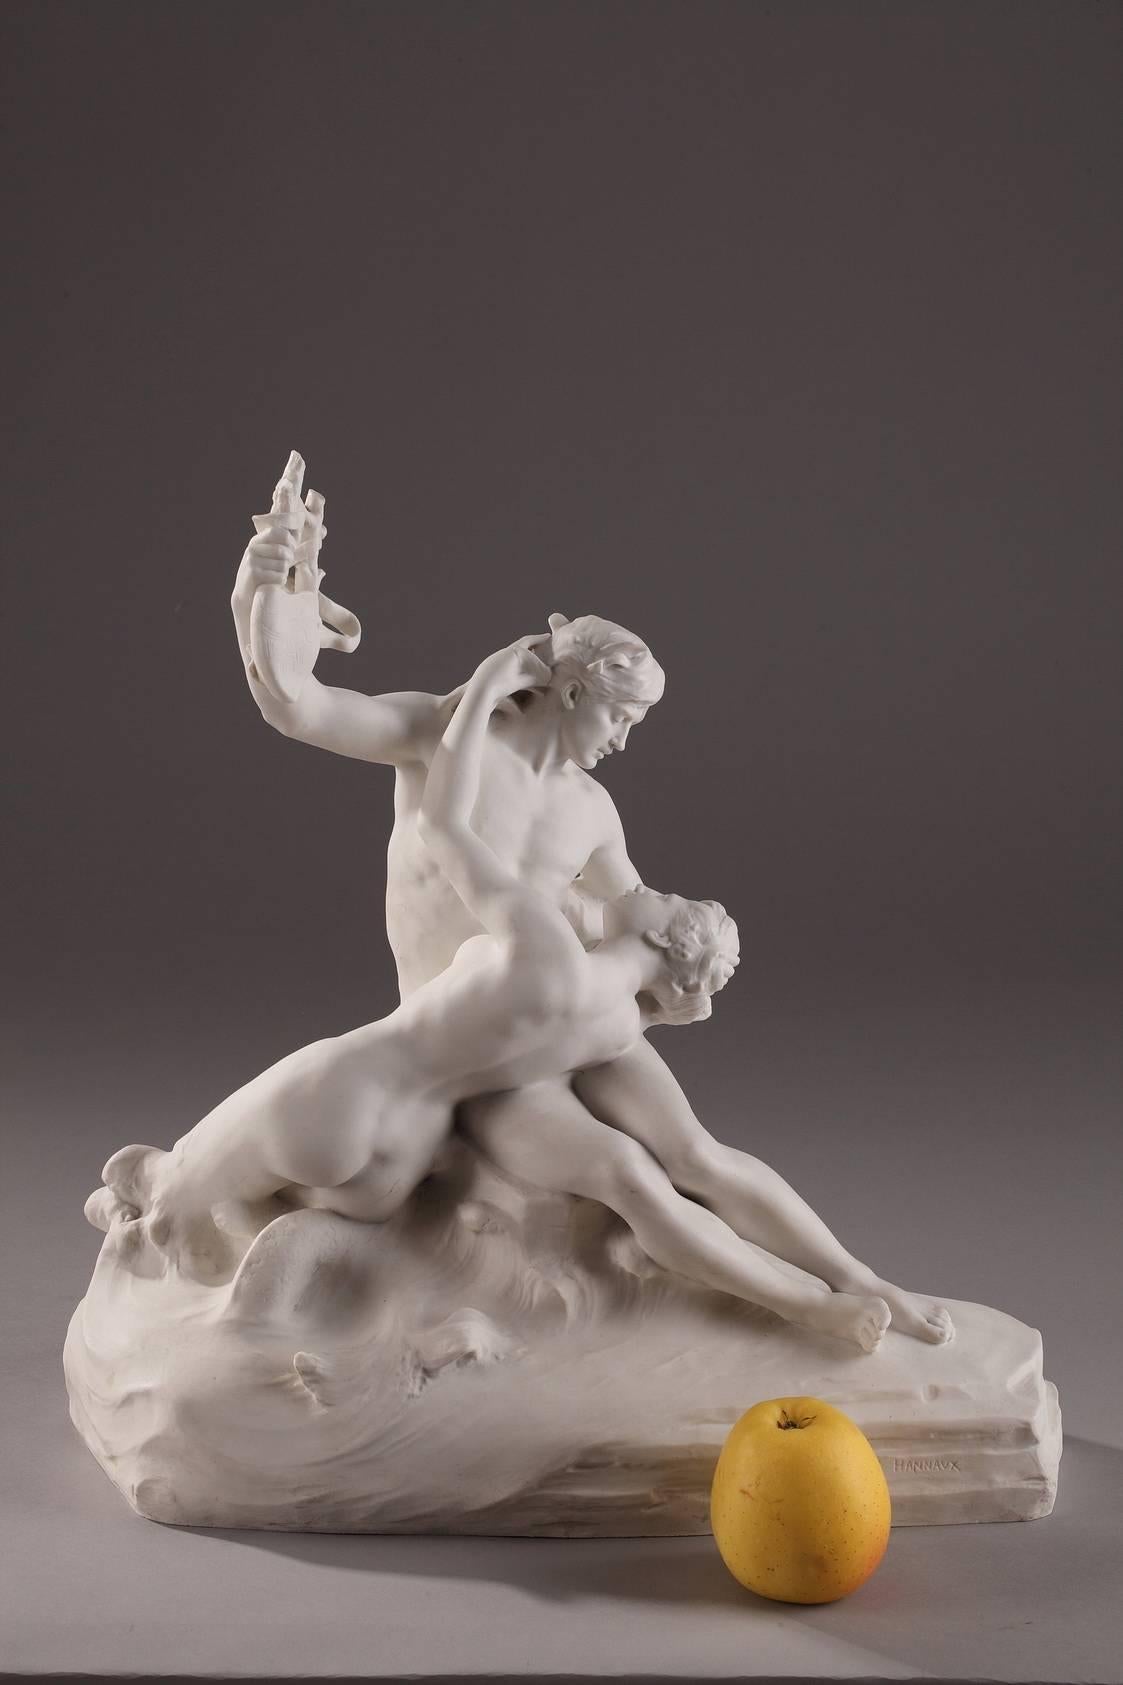 “Le Poète et La Sirène” by Emmanuel Hannaux (1855-1934.)

Mythological group in Sèvres biscuit porcelain portraying a mermaid caught in the embrace of a young poet holding a harp. This romantic and voluptuous subject perfectly illustrates the